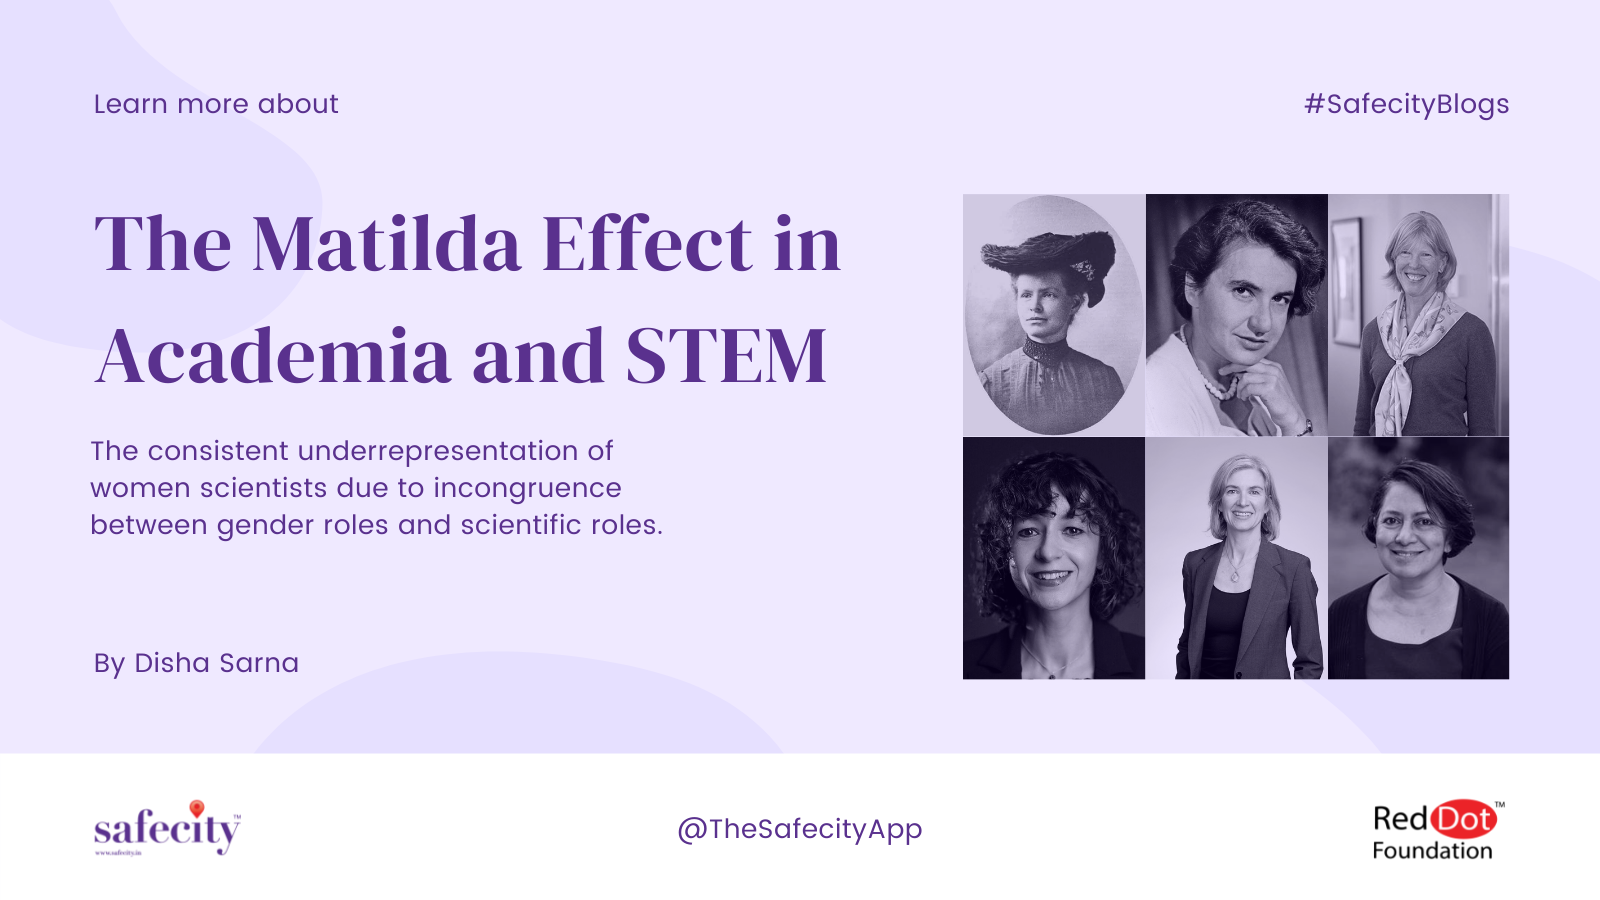 The Matilda Effect in Academia and STEM